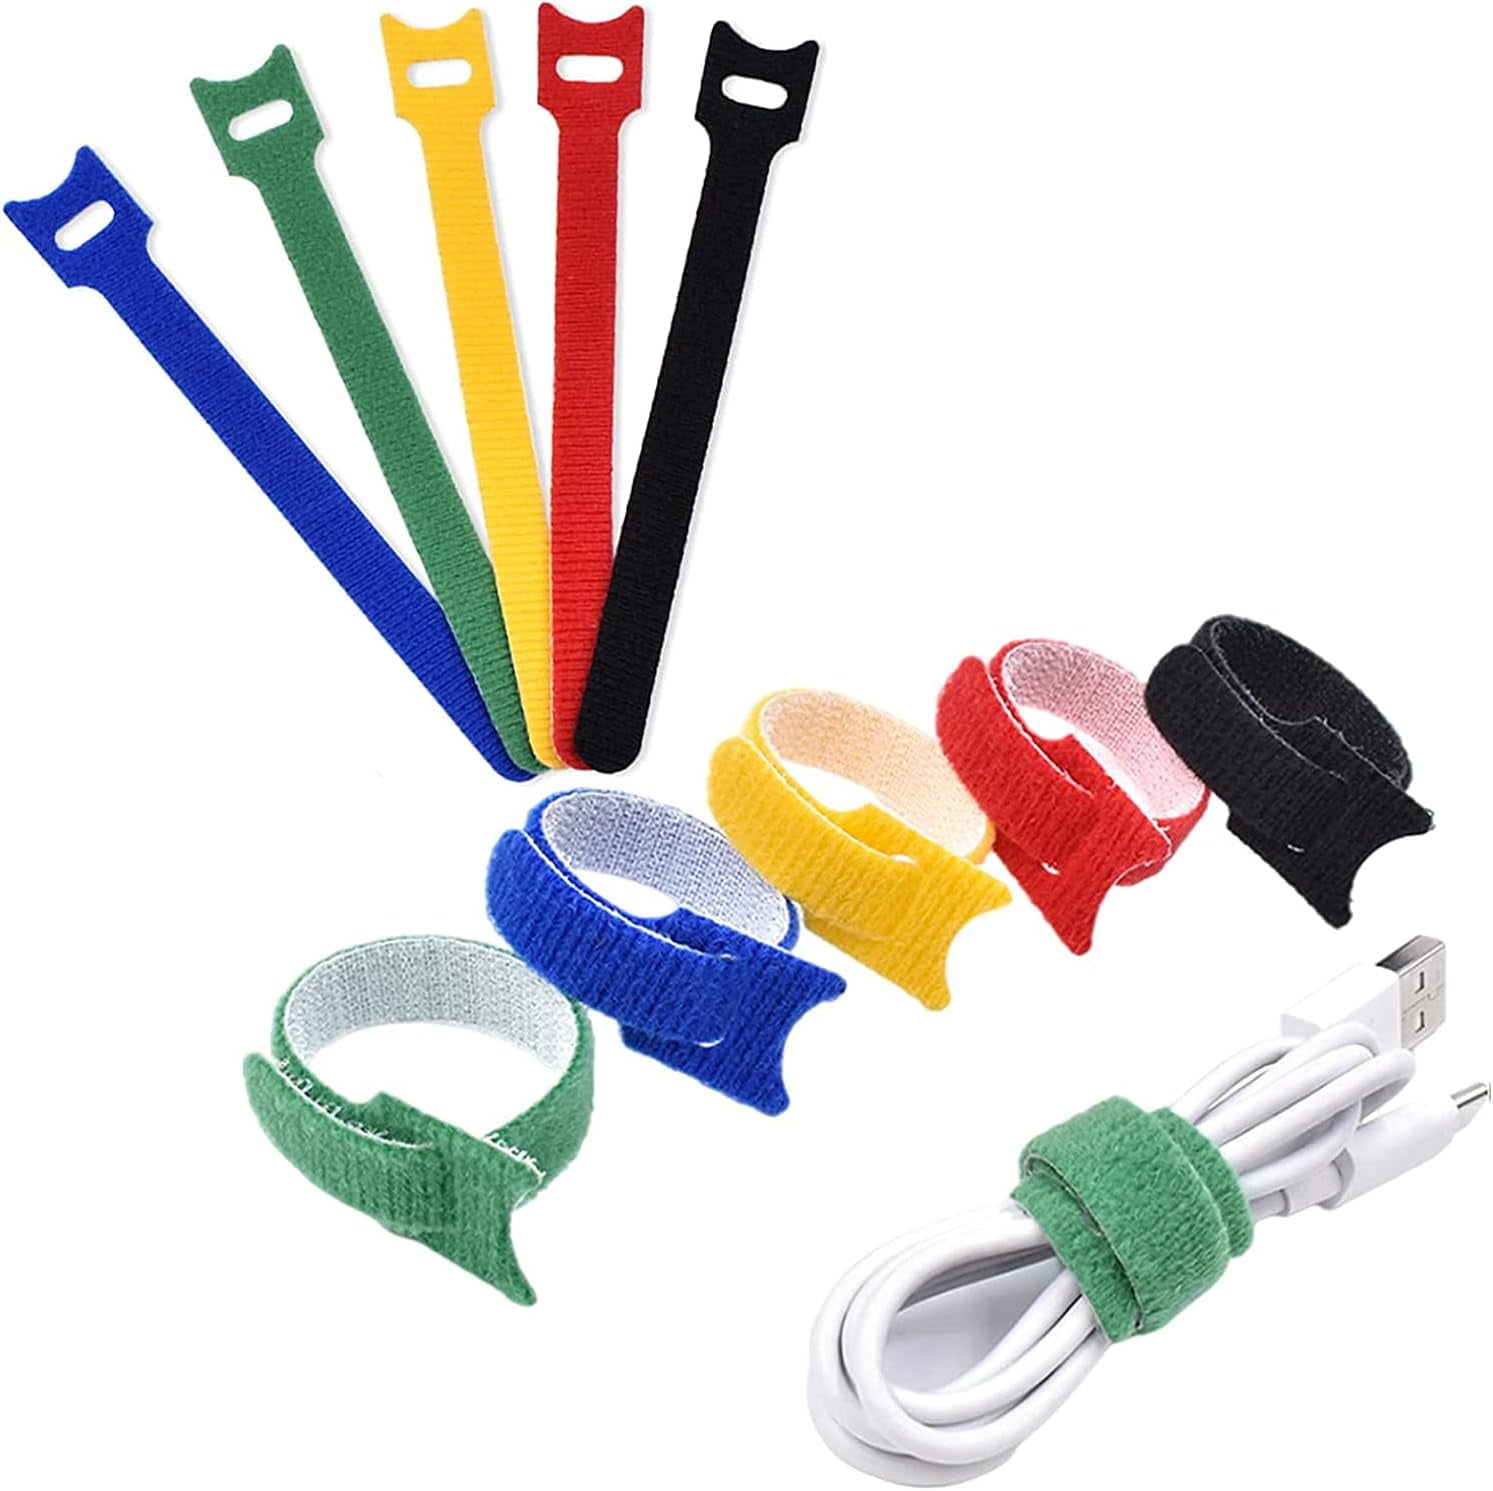 Pack of 50 Velcro Ties Nylon Reusable Velcro Cable Ties Resealable